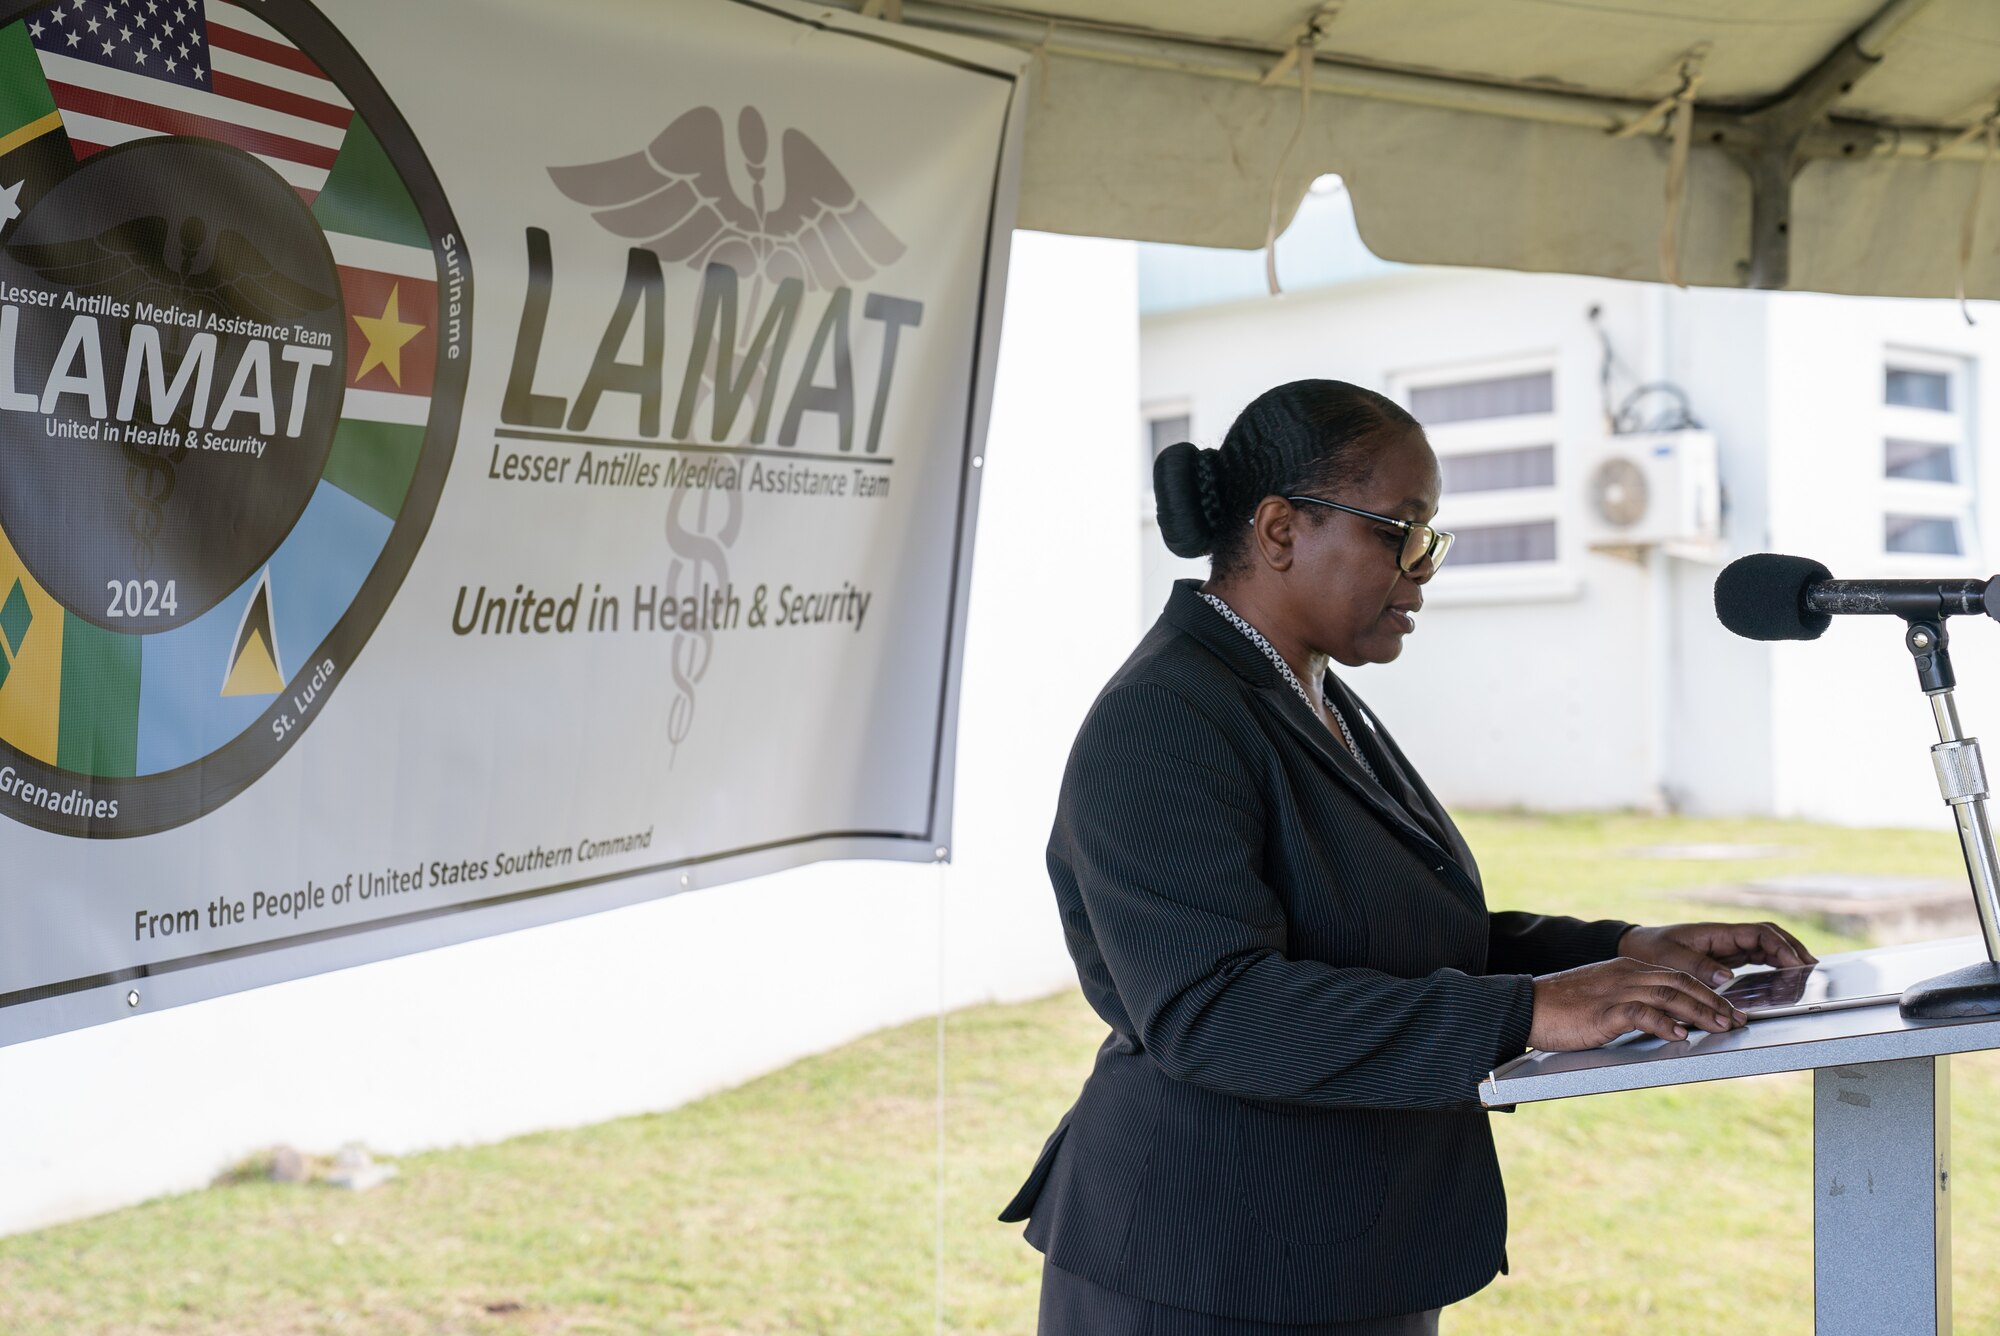 Ms. Kaye Bass, permanent secretary, Ministry of Foreign Affairs, delivers opening remarks at Joseph N. France General Hospital during the Lesser Antilles Medical Assistance Team opening ceremony in St. Kitts and Nevis, March 18, 2024. Forty-three U.S. Air Force active duty and reserve Airmen traveled to St. Kitts and Nevis in support of this year’s Lesser Antilles Medical Assistance Team mission, where they will be working alongside host nation counterparts to foster mutual collaboration and provide the best possible care for patients. (U.S. Air Force photo by Capt. Danny Rangel)